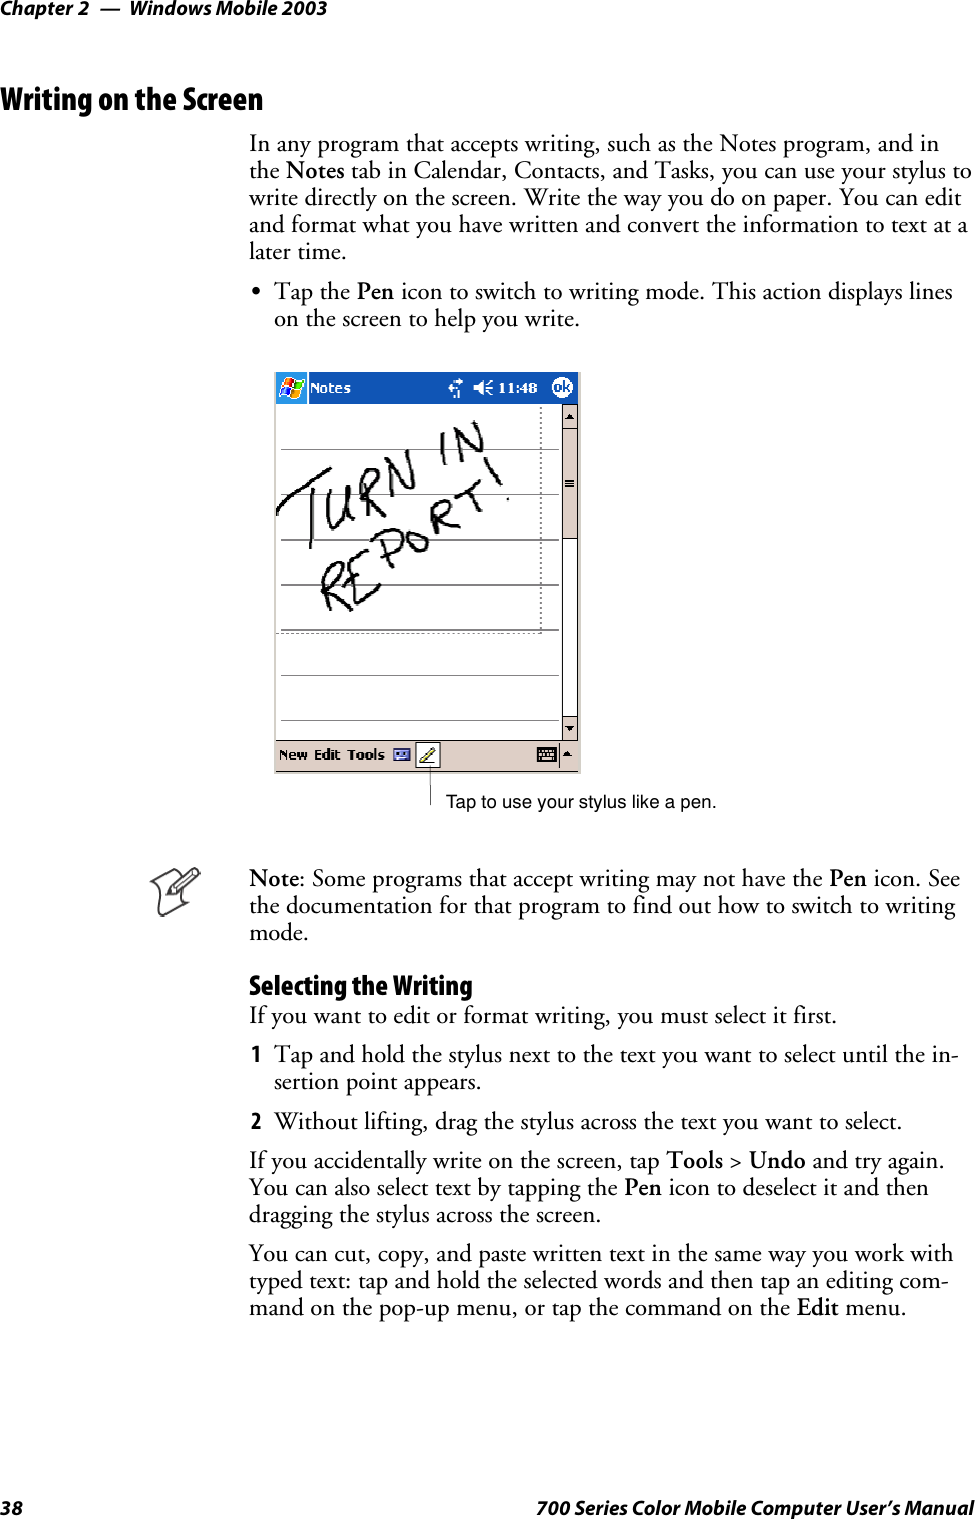 Windows Mobile 2003Chapter —238 700 Series Color Mobile Computer User’s ManualWriting on the ScreenIn any program that accepts writing, such as the Notes program, and inthe Notes tab in Calendar, Contacts, and Tasks, you can use your stylus towrite directly on the screen. Write the way you do on paper. You can editandformatwhatyouhavewrittenandconverttheinformationtotextatalater time.STap the Pen icon to switch to writing mode. This action displays lineson the screen to help you write.Tap to use your stylus like a pen.Note: Some programs that accept writing may not have the Pen icon. Seethe documentation for that program to find out how to switch to writingmode.Selecting the WritingIfyouwanttoeditorformatwriting,youmustselectitfirst.1Tap and hold the stylus next to the text you want to select until the in-sertion point appears.2Without lifting, drag the stylus across the text you want to select.If you accidentally write on the screen, tap Tools &gt;Undo and try again.You can also select text by tapping the Pen icon to deselect it and thendragging the stylus across the screen.You can cut, copy, and paste written text in the same way you work withtyped text: tap and hold the selected words and then tap an editing com-mand on the pop-up menu, or tap the command on the Edit menu.